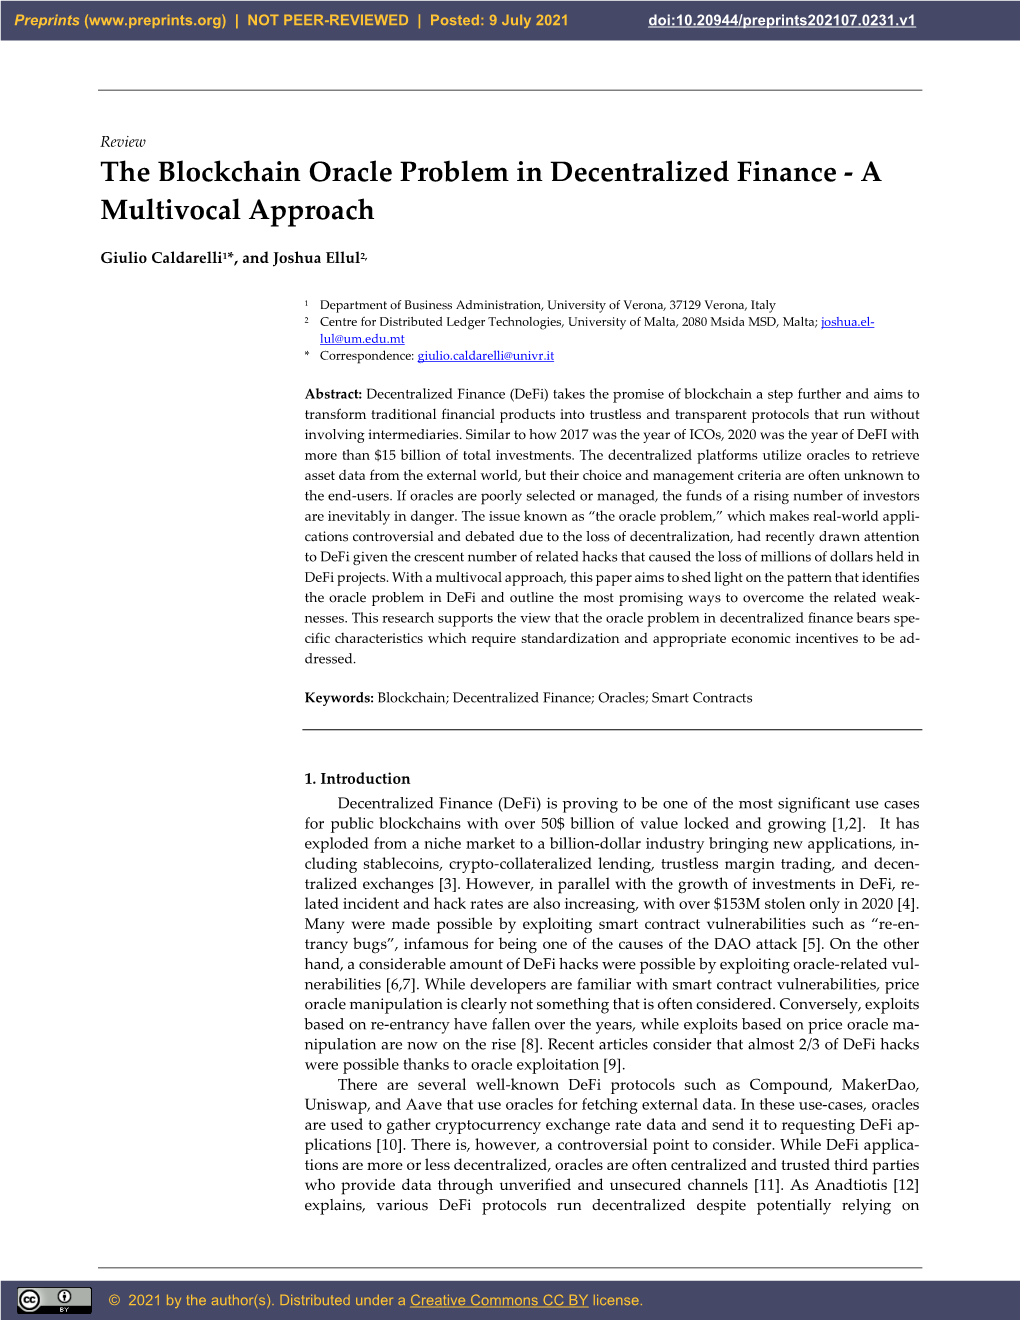 The Blockchain Oracle Problem in Decentralized Finance - a Multivocal Approach